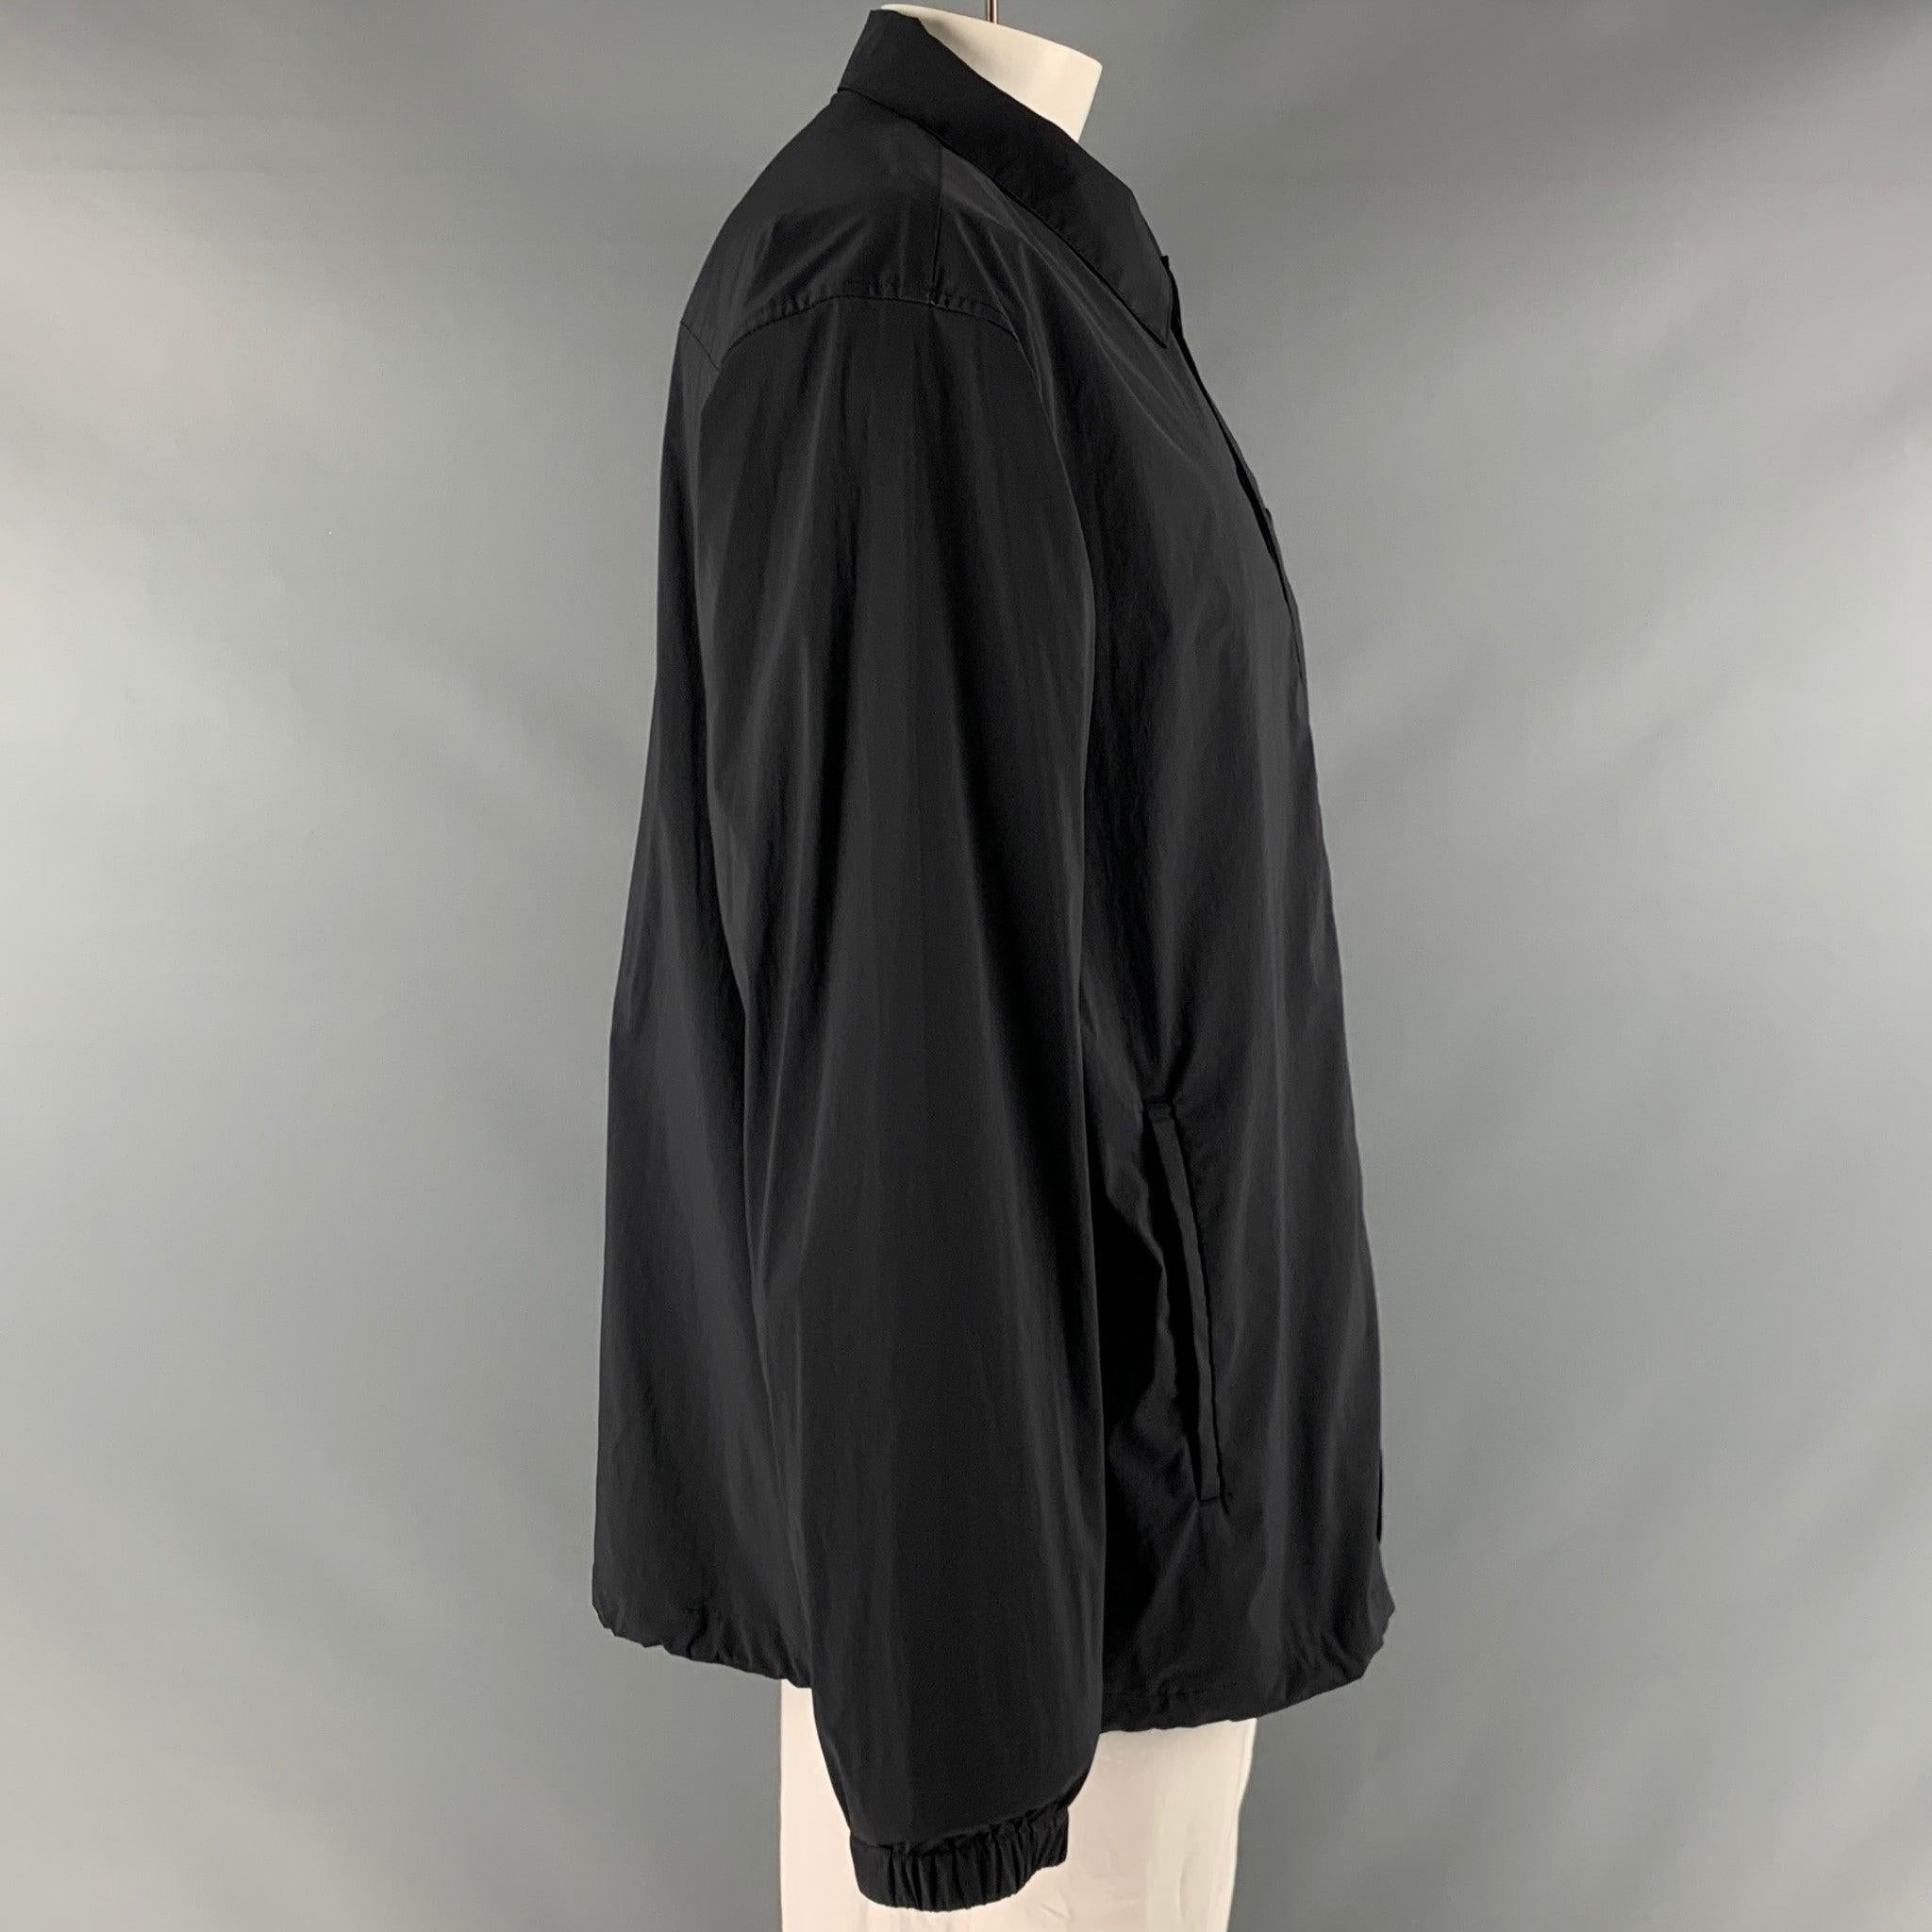 THEORY windbreaker jacket in a black nylon fabric featuring white and drawstring hem, elastic cuffs, welt pockets, and a snap closure.Very Good Pre-Owned Condition. Minor marks. 

Marked:   XXL 

Measurements: 
 
Shoulder: 23 inches Chest: 45 inches